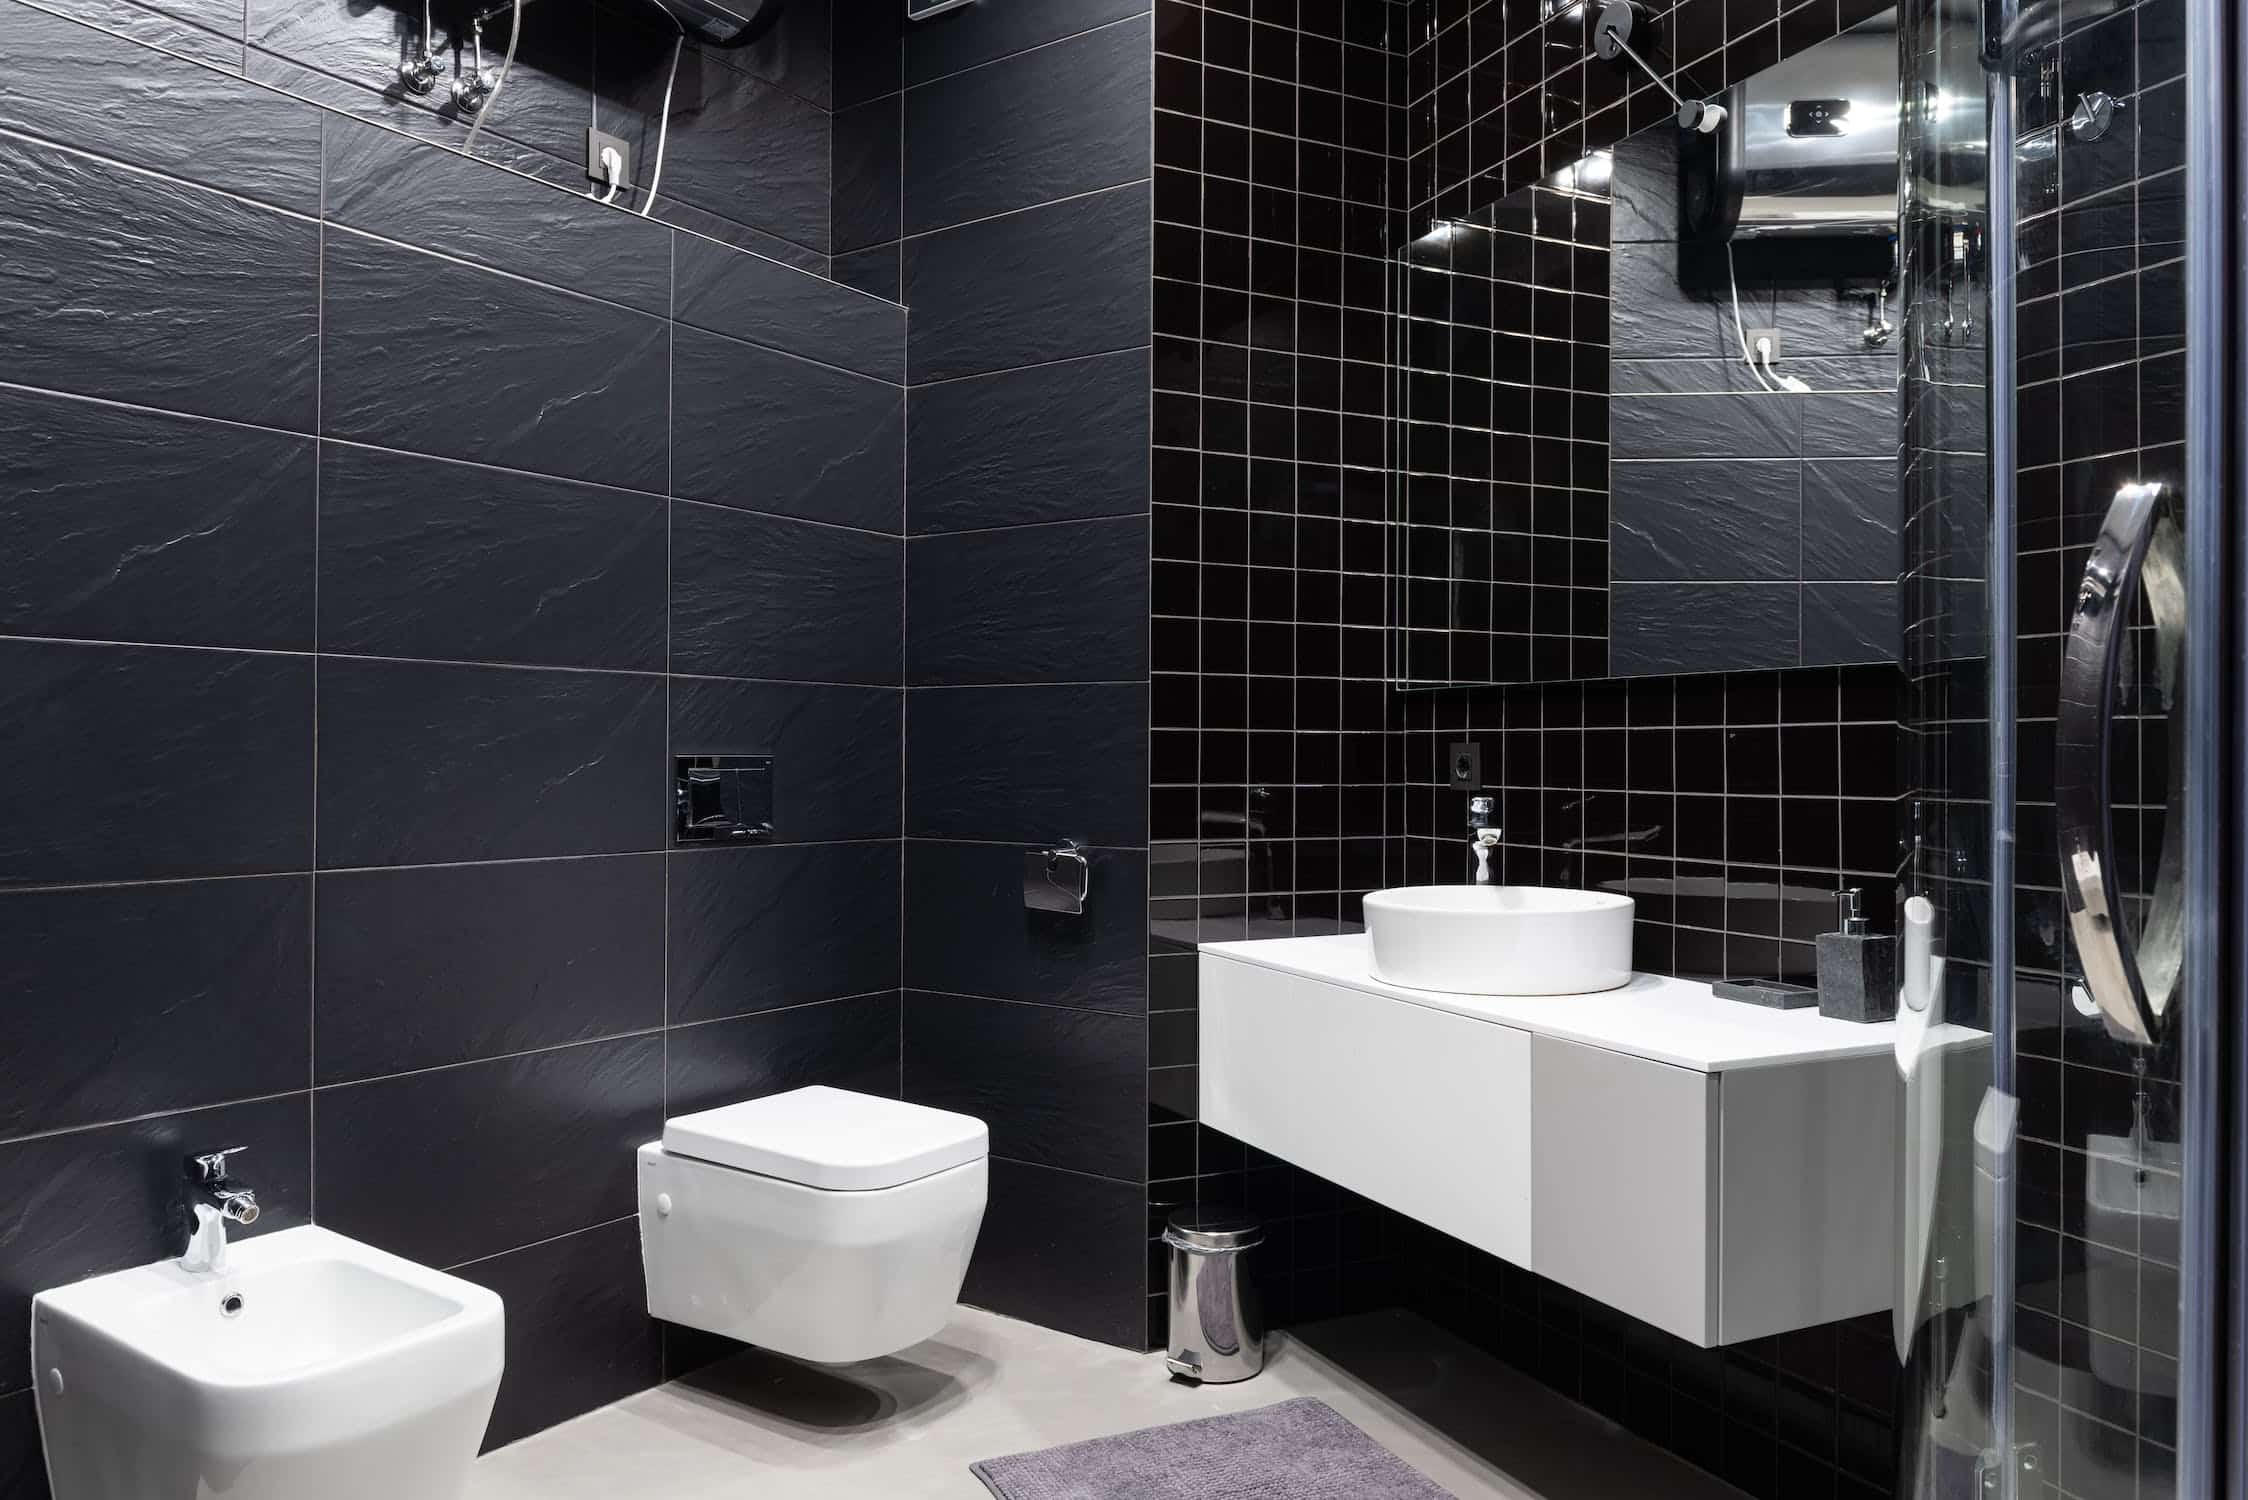 all black bold compact restroom, floating water closet, mirror, tiles